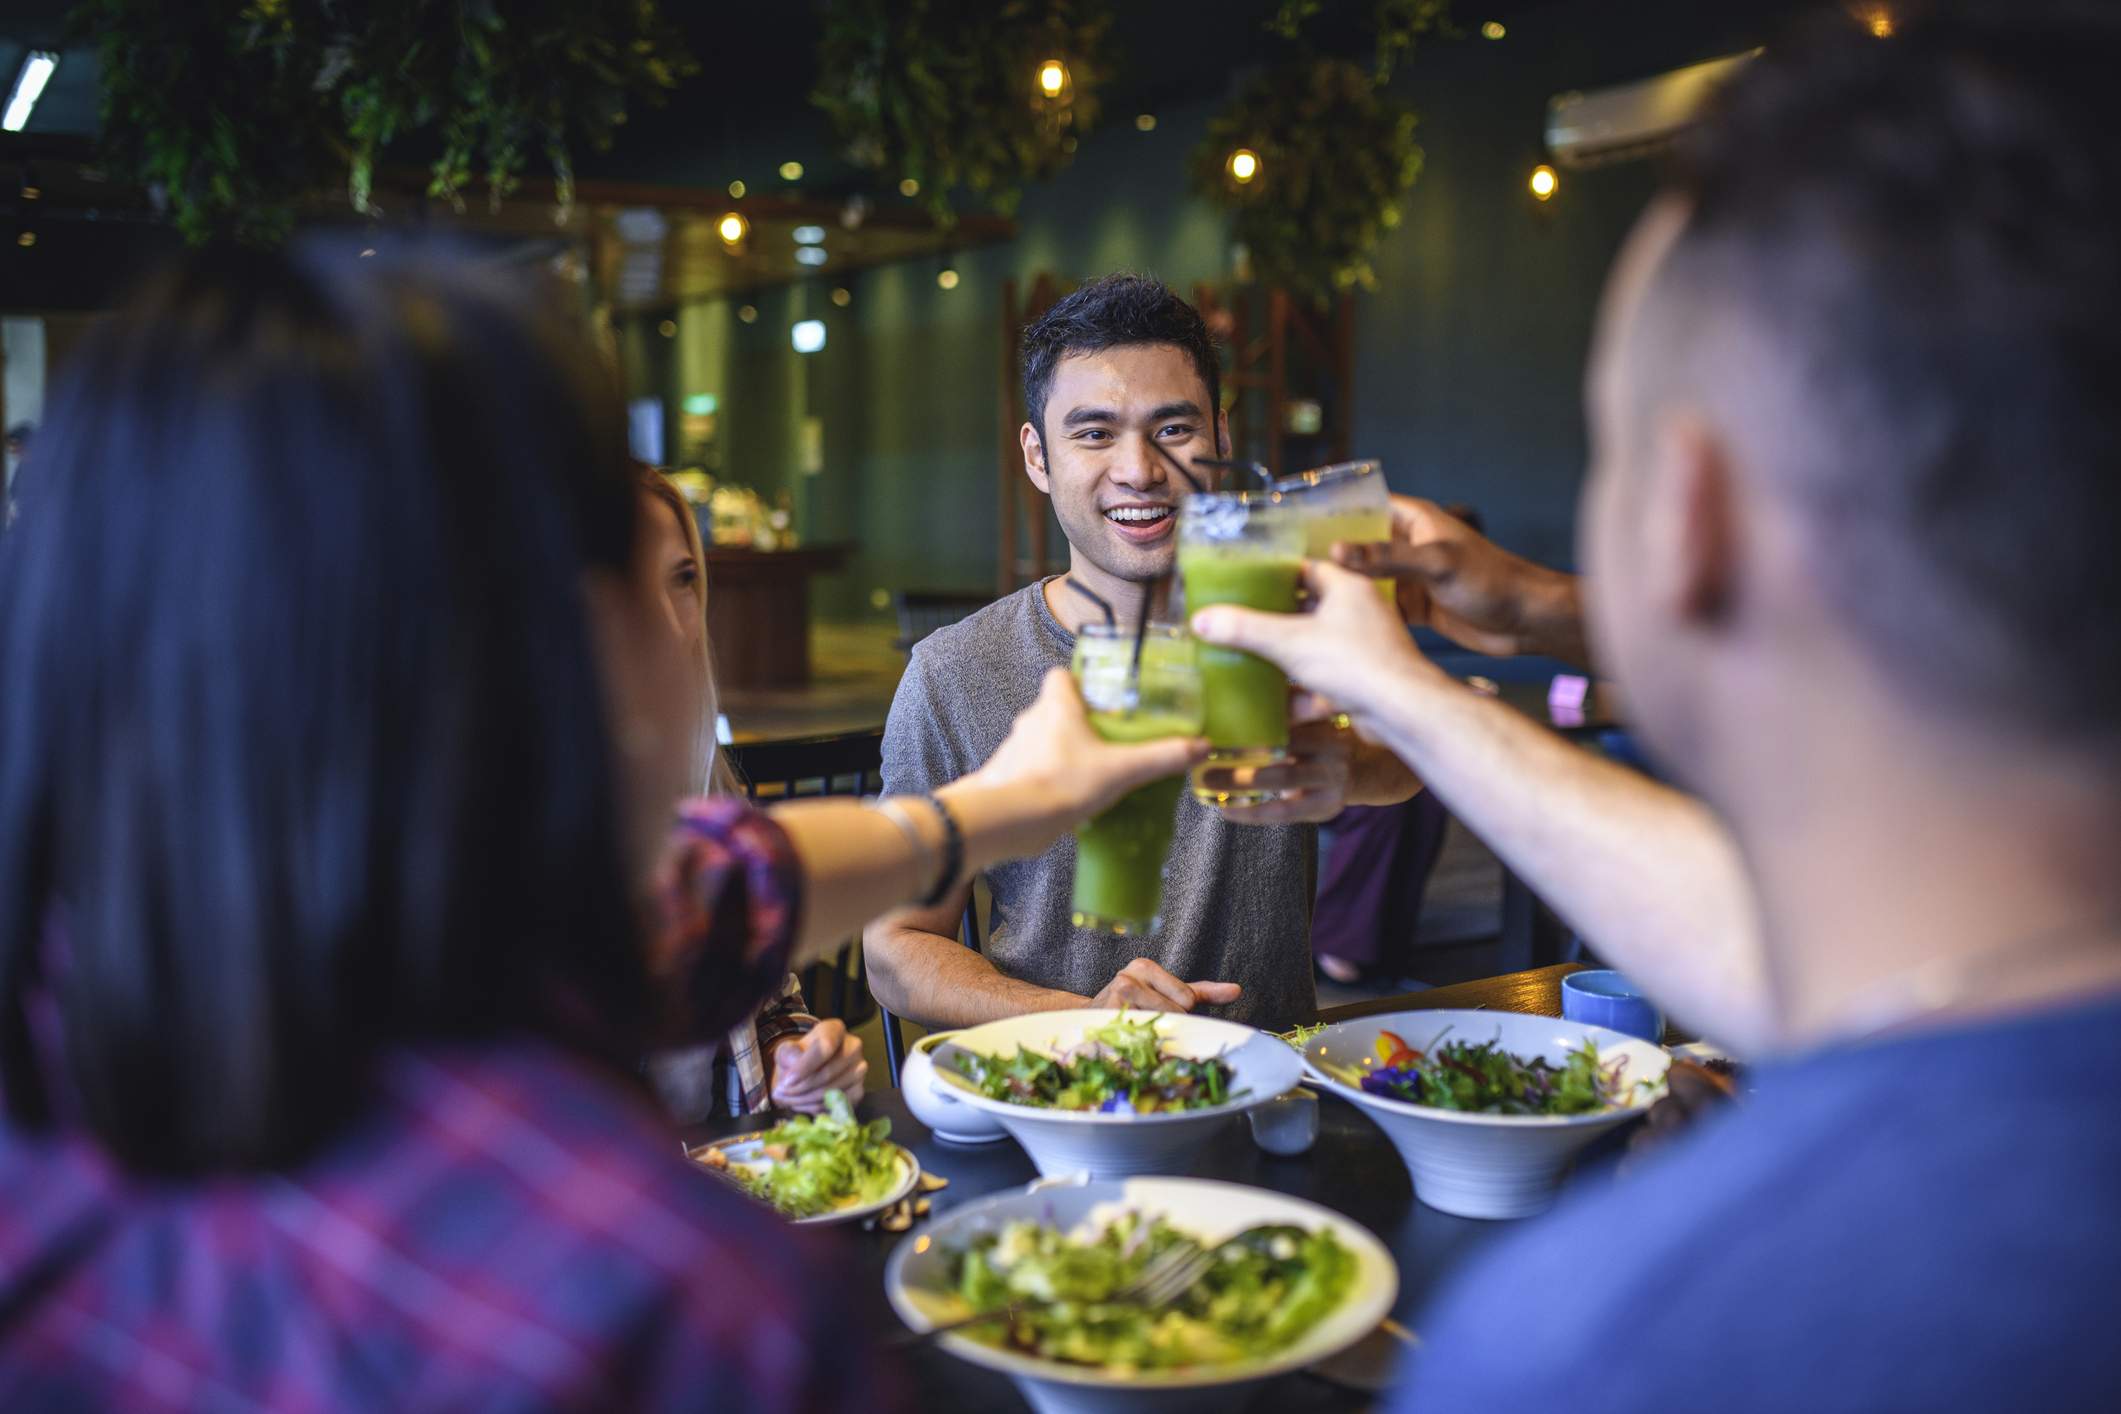 Image depicts a group of people cheersing green juices at a restaurant.